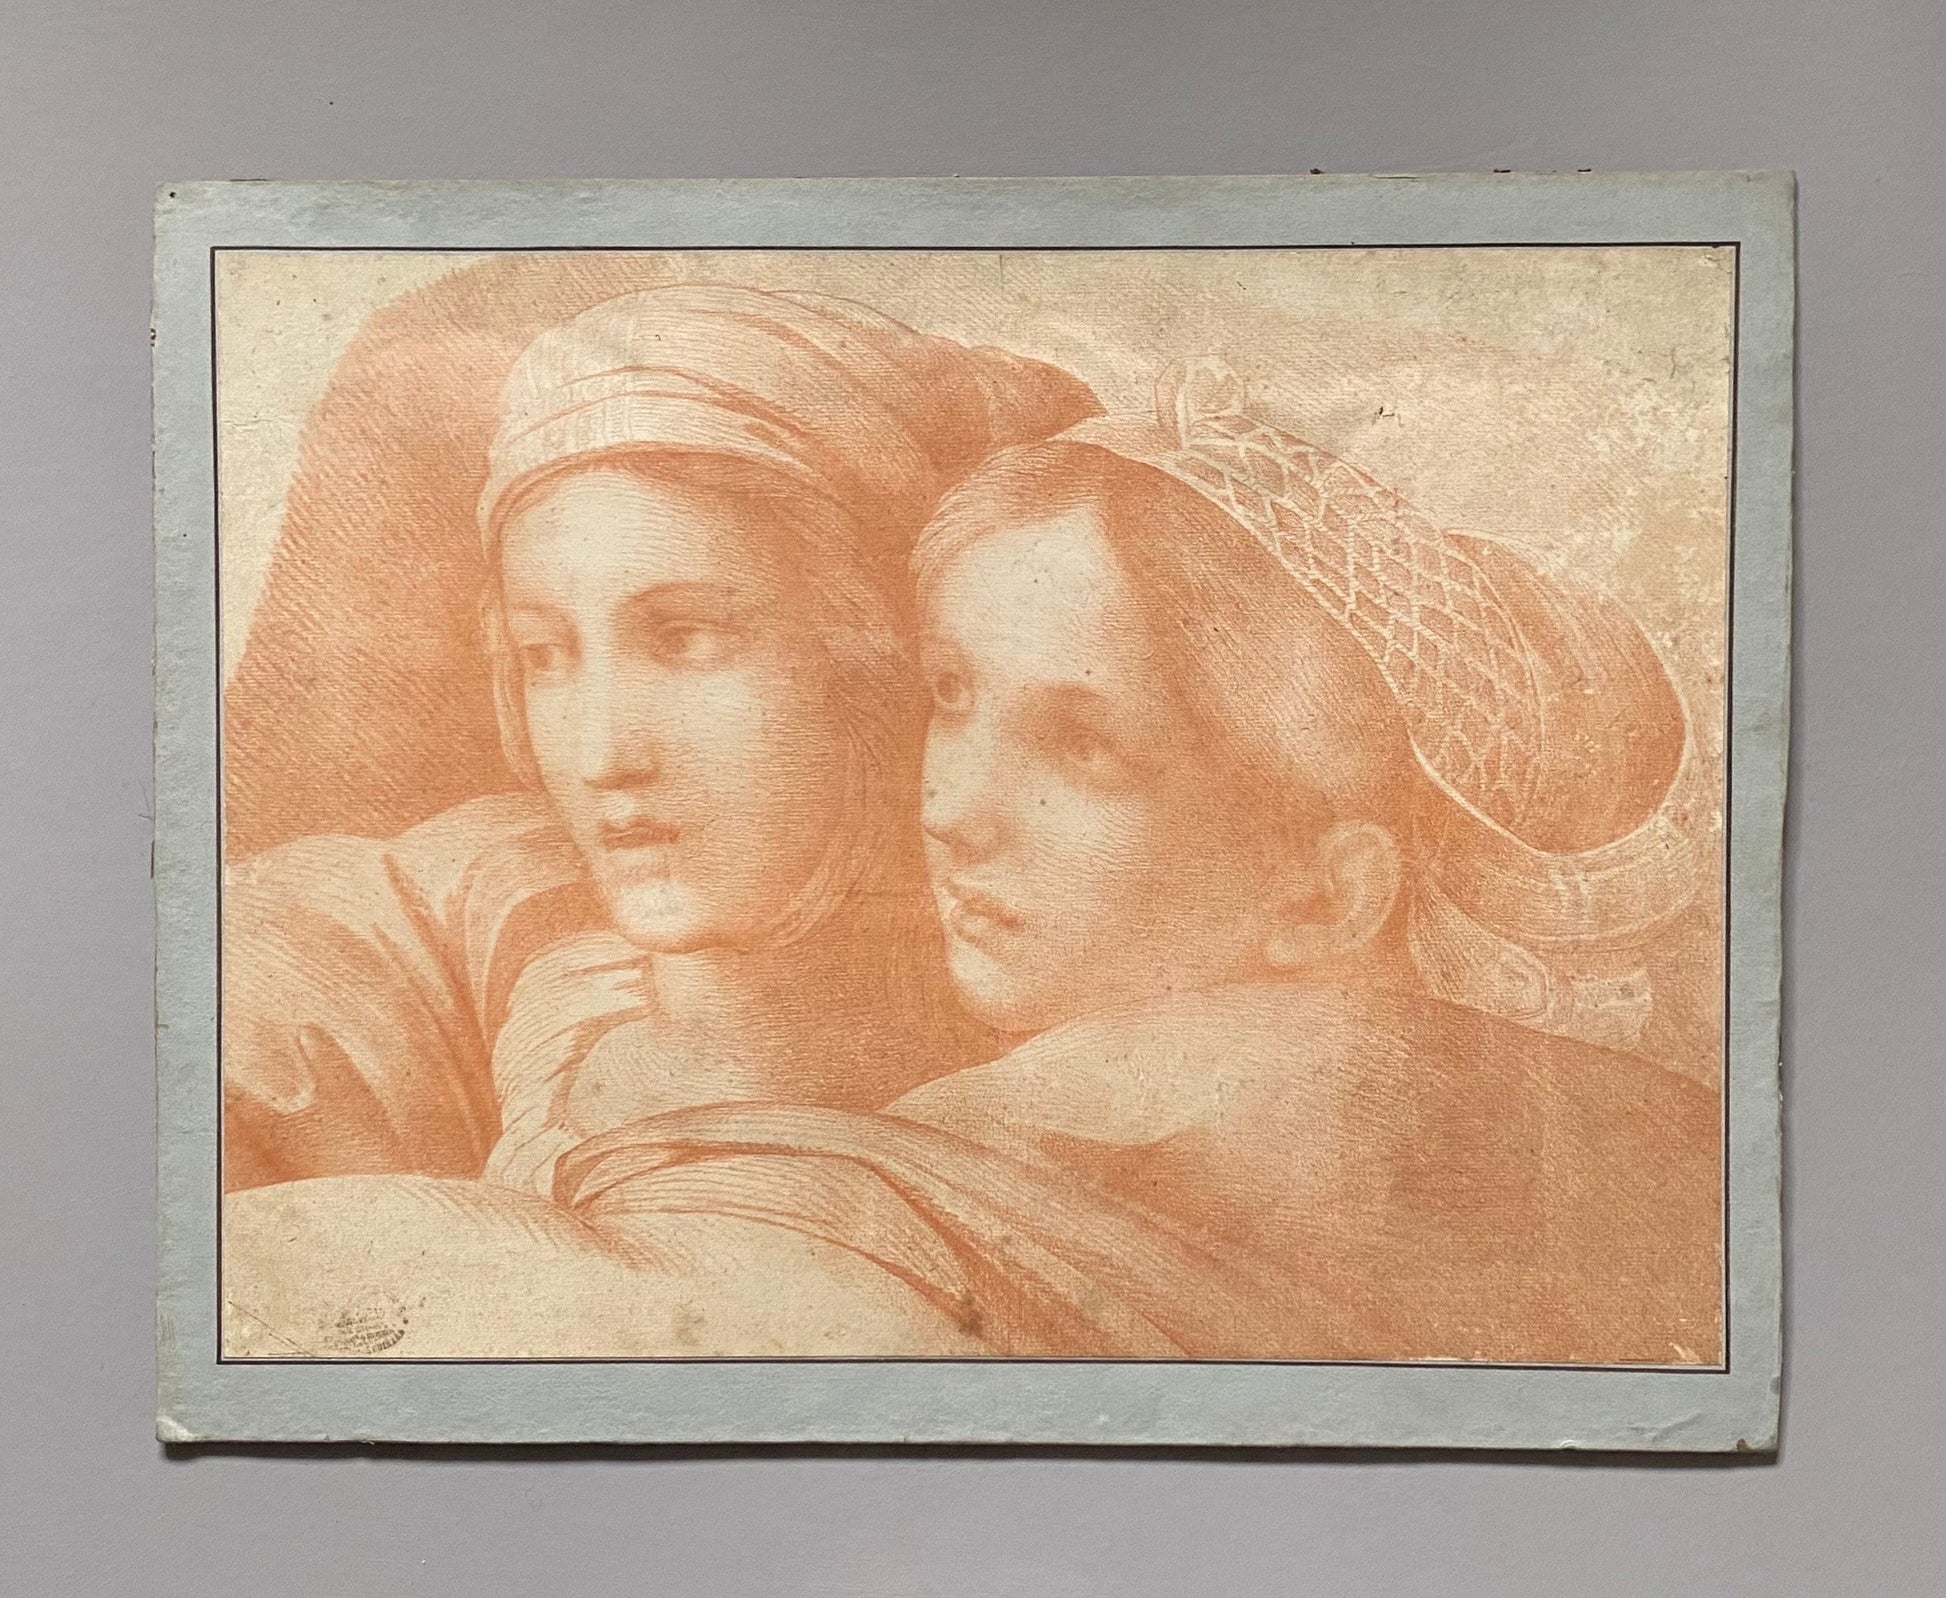 A Original Antigue Hand Drawn Sanguine Drawing. Two Young Women . French. Late 18th Century. Size: 38.5 x 52 cms.